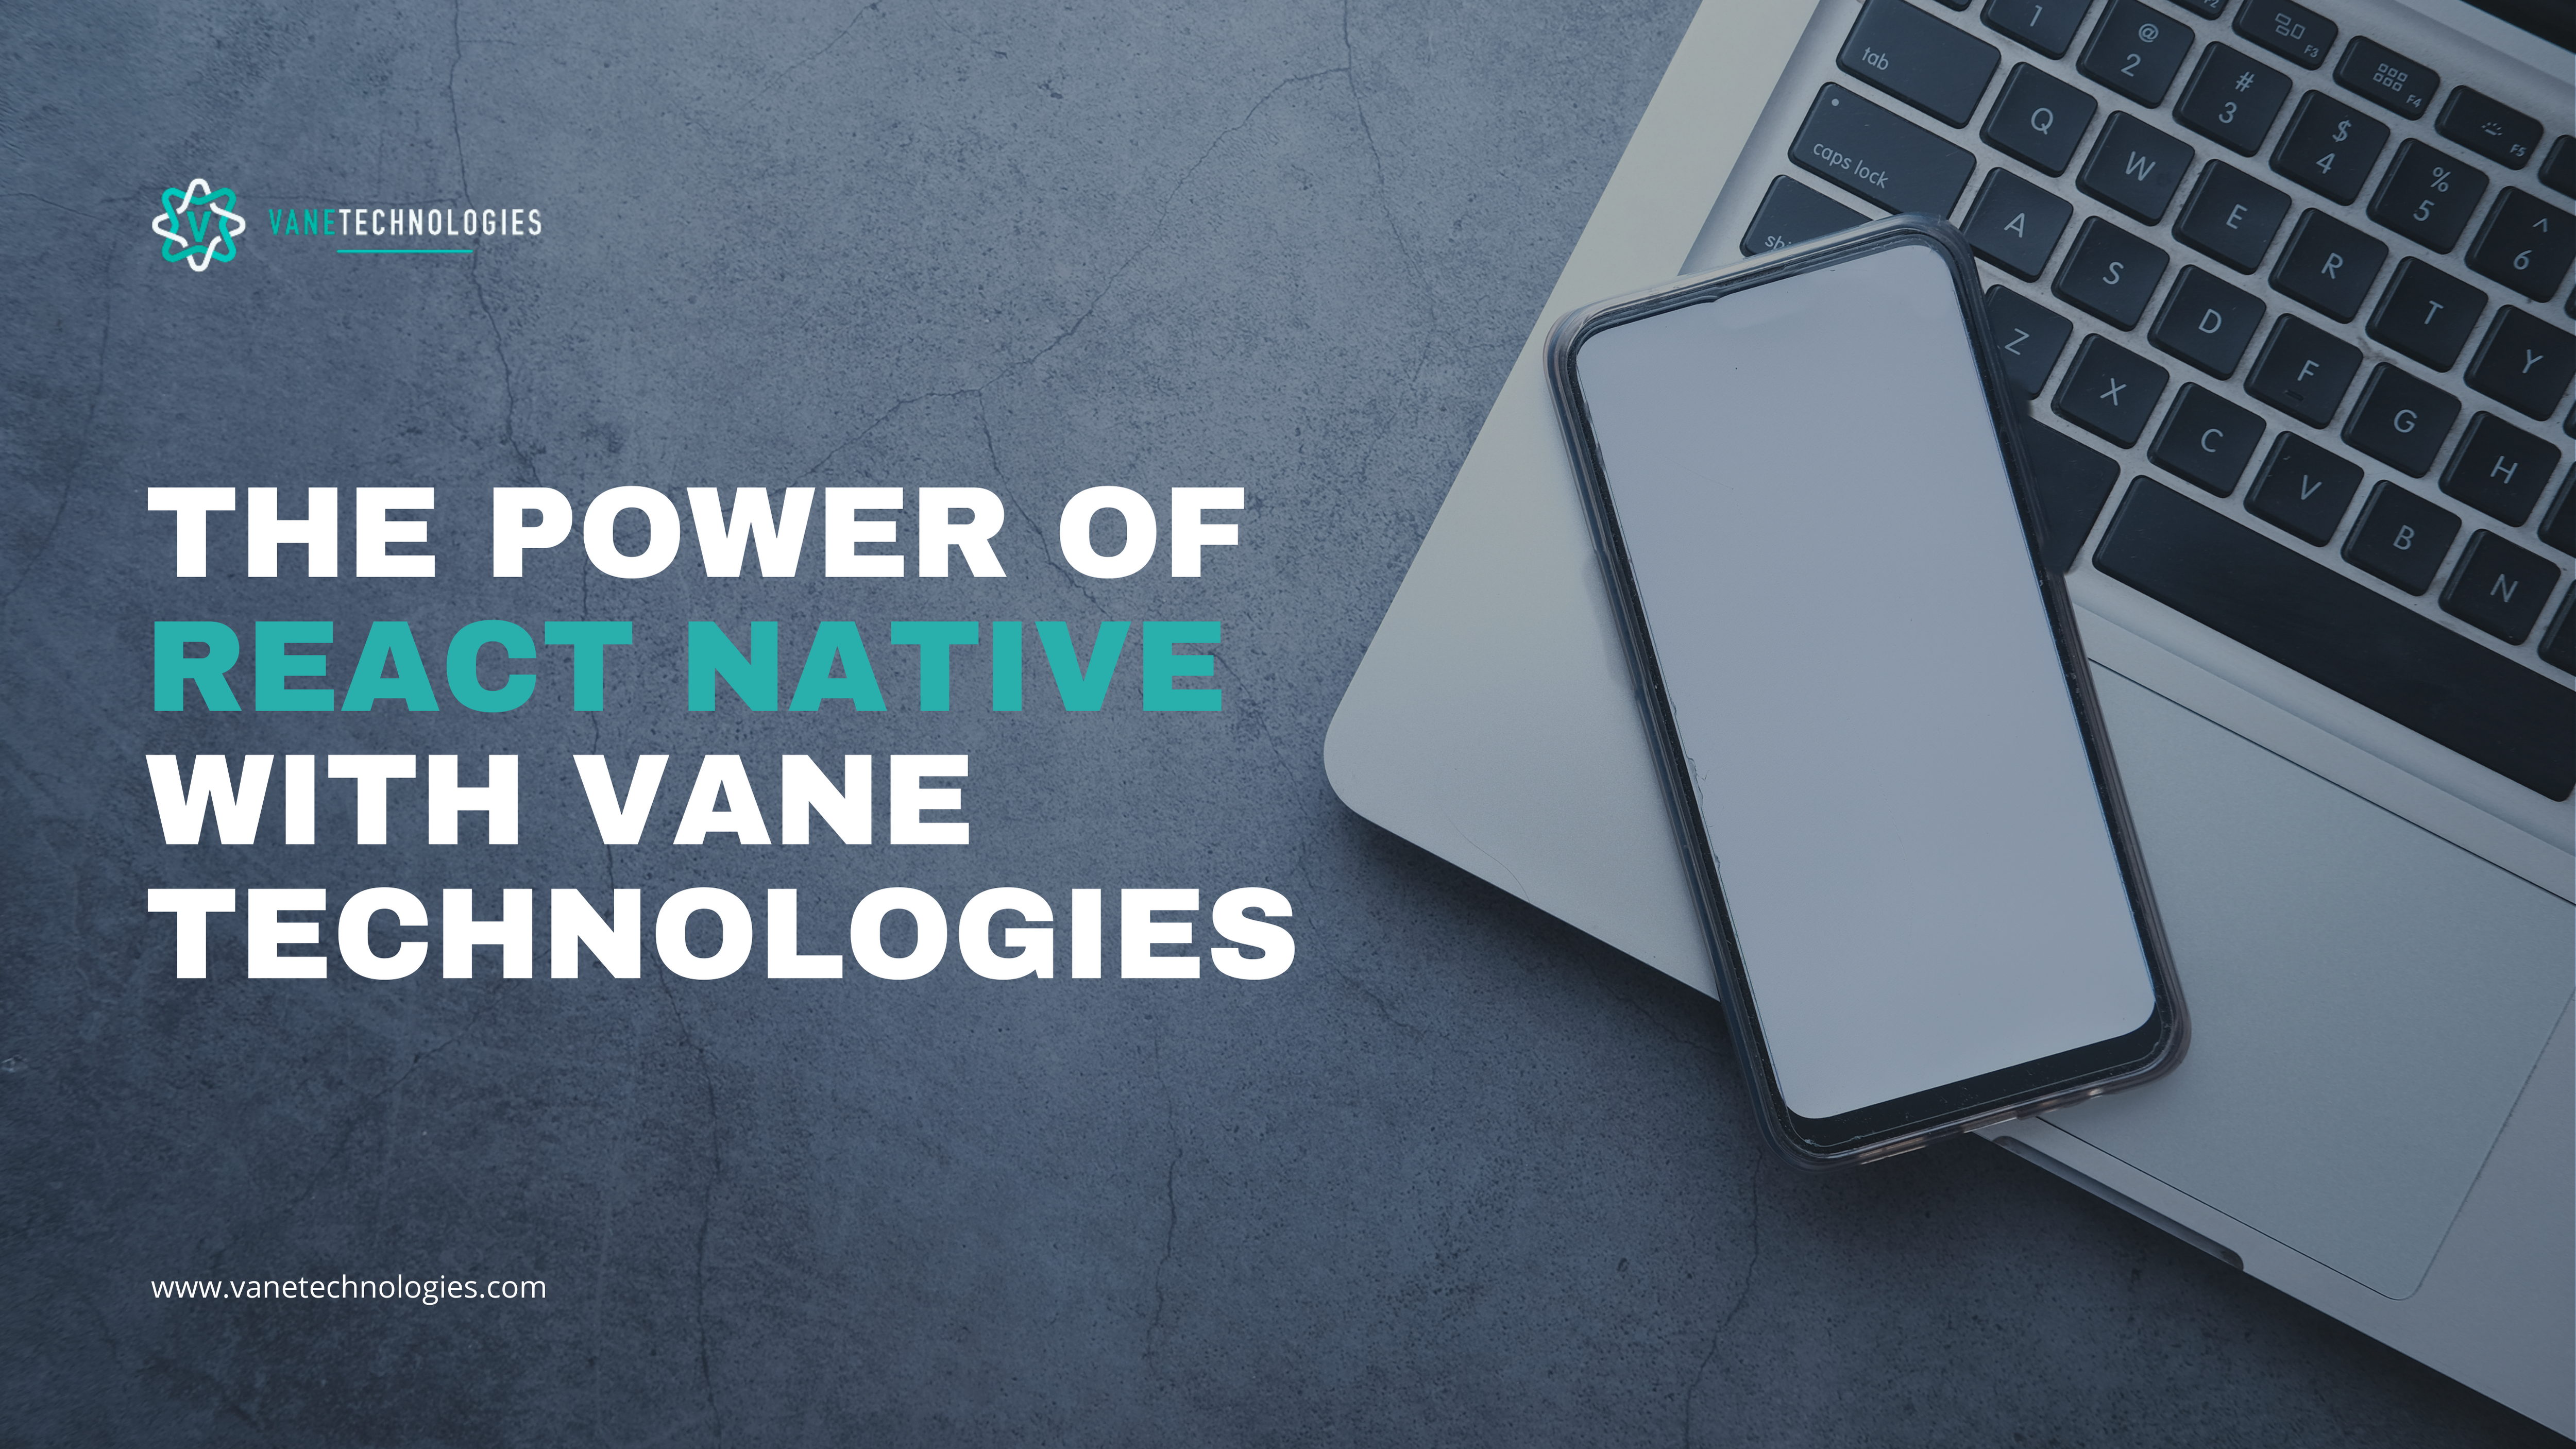 The Power of React Native with Vane Technologies